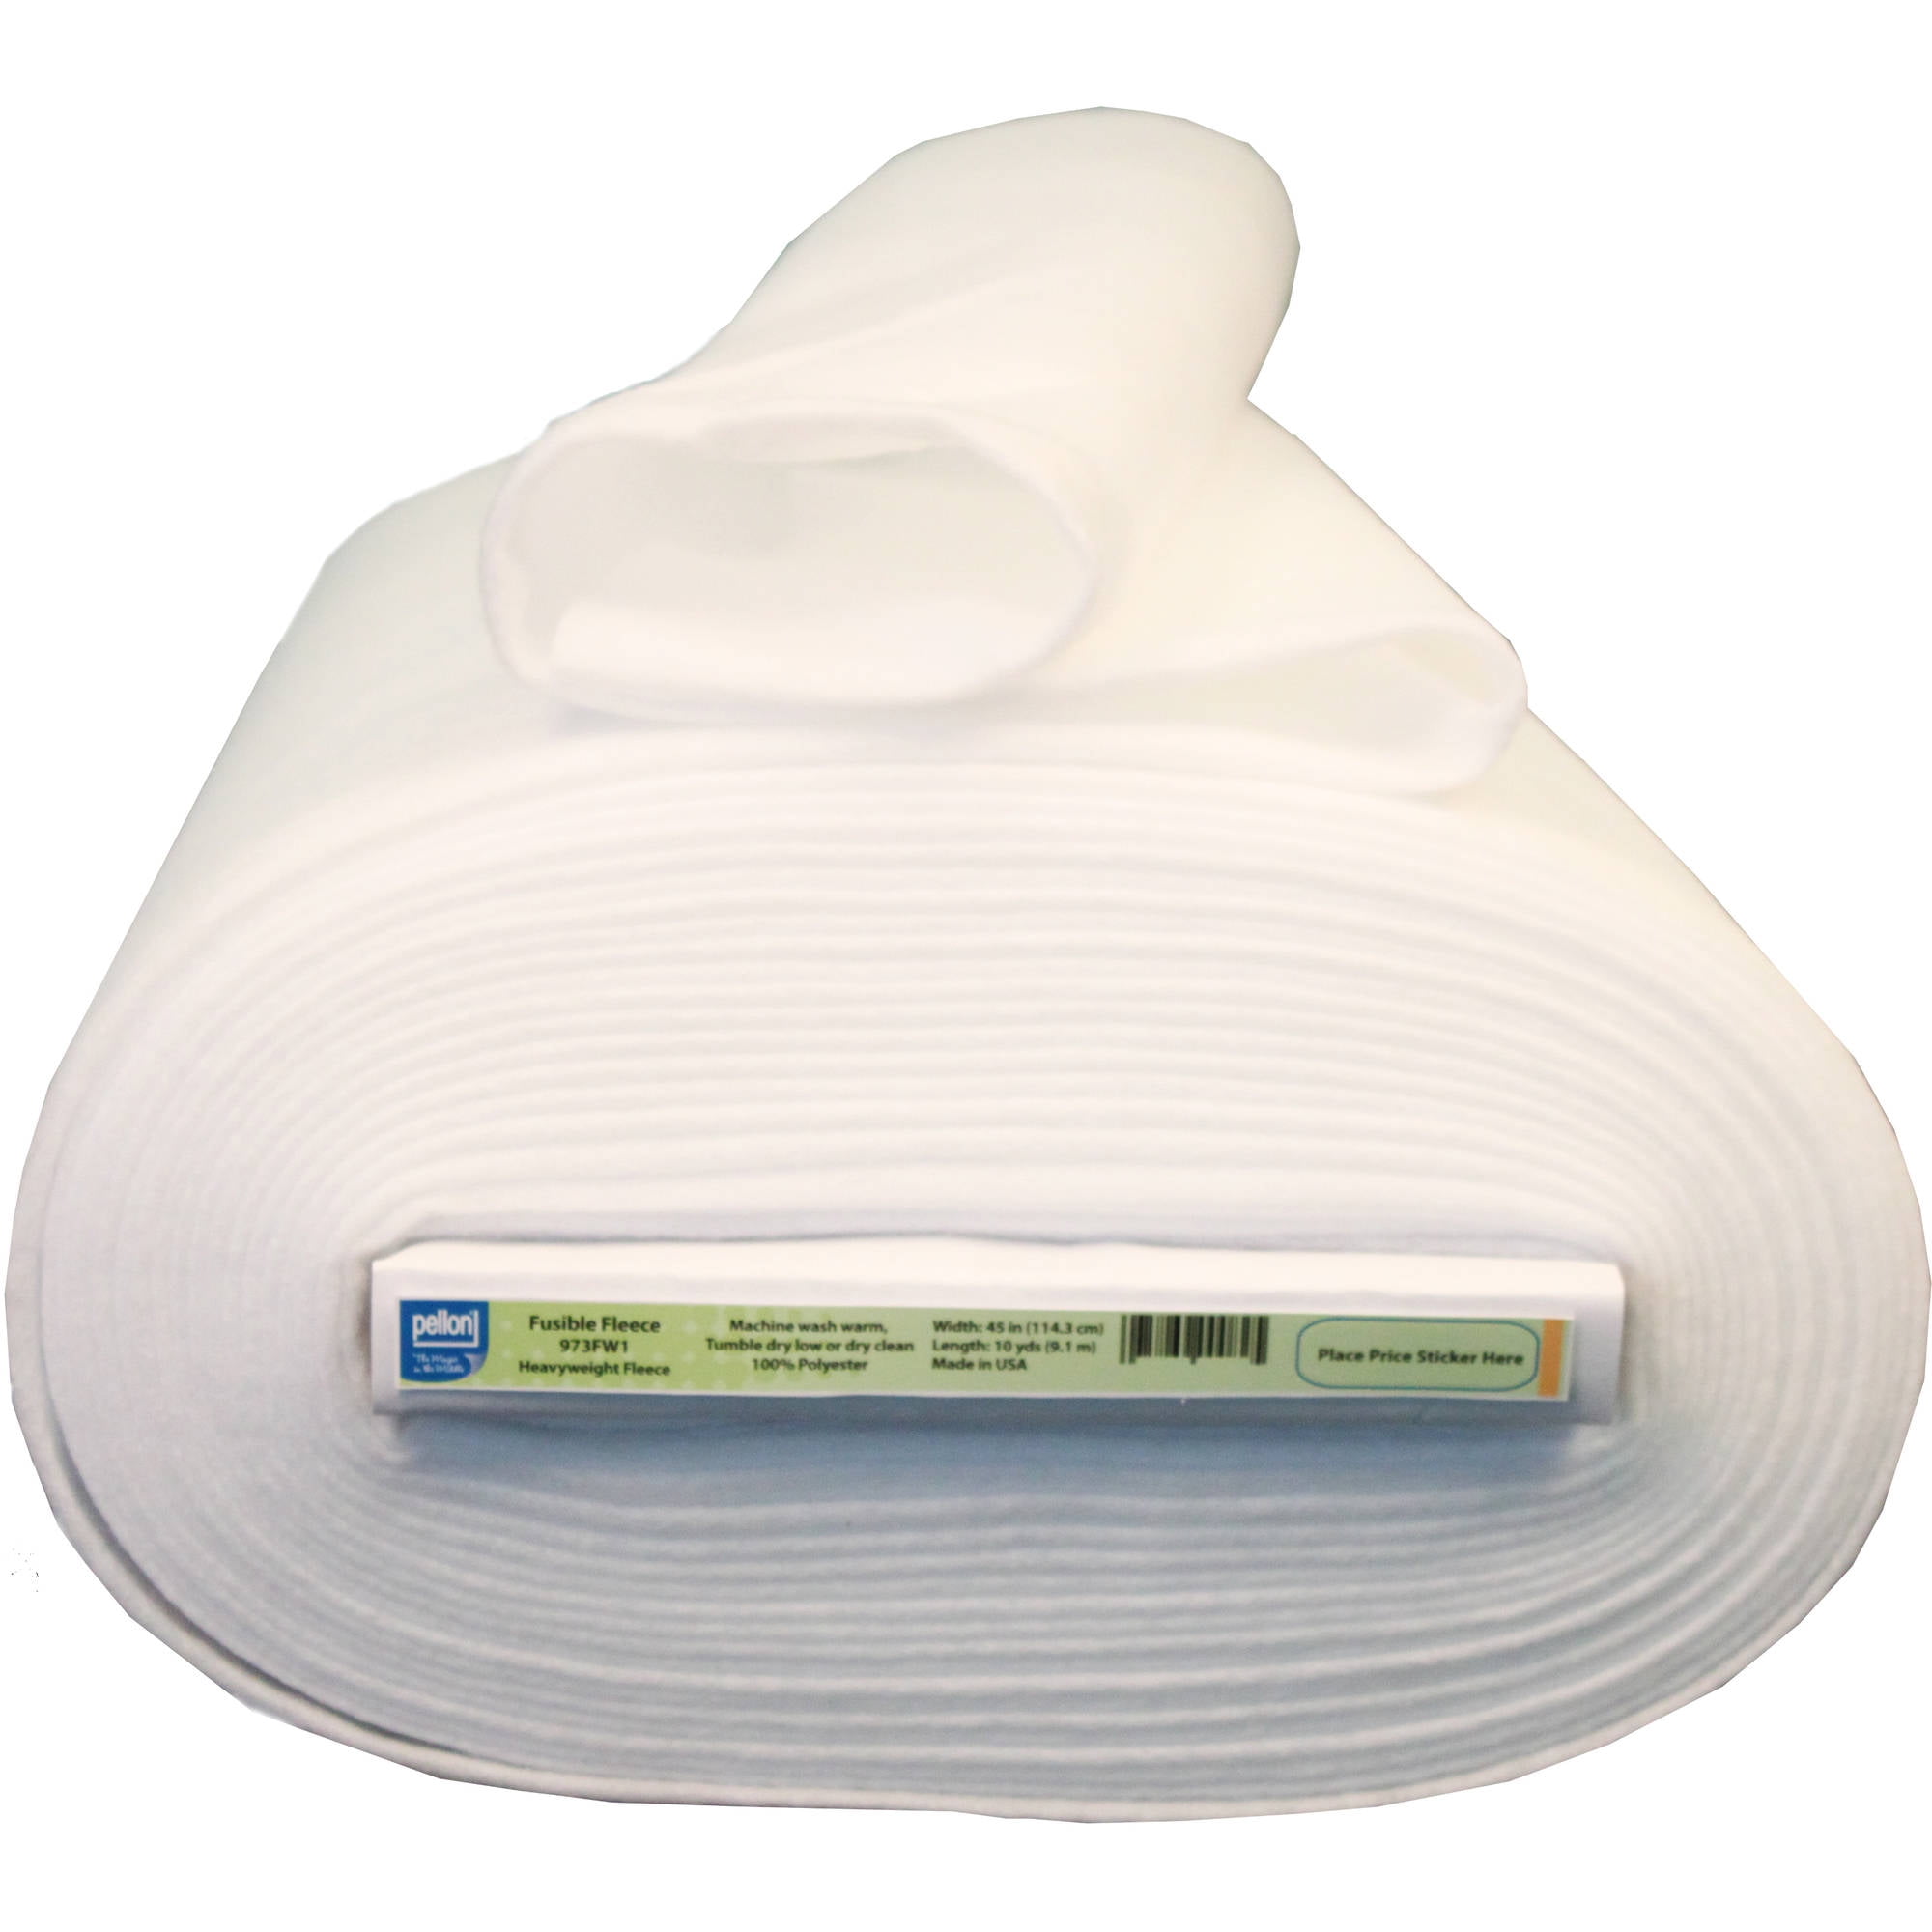 Grand Luxe Fusible Fleece 45in # LX825 - 000943008255